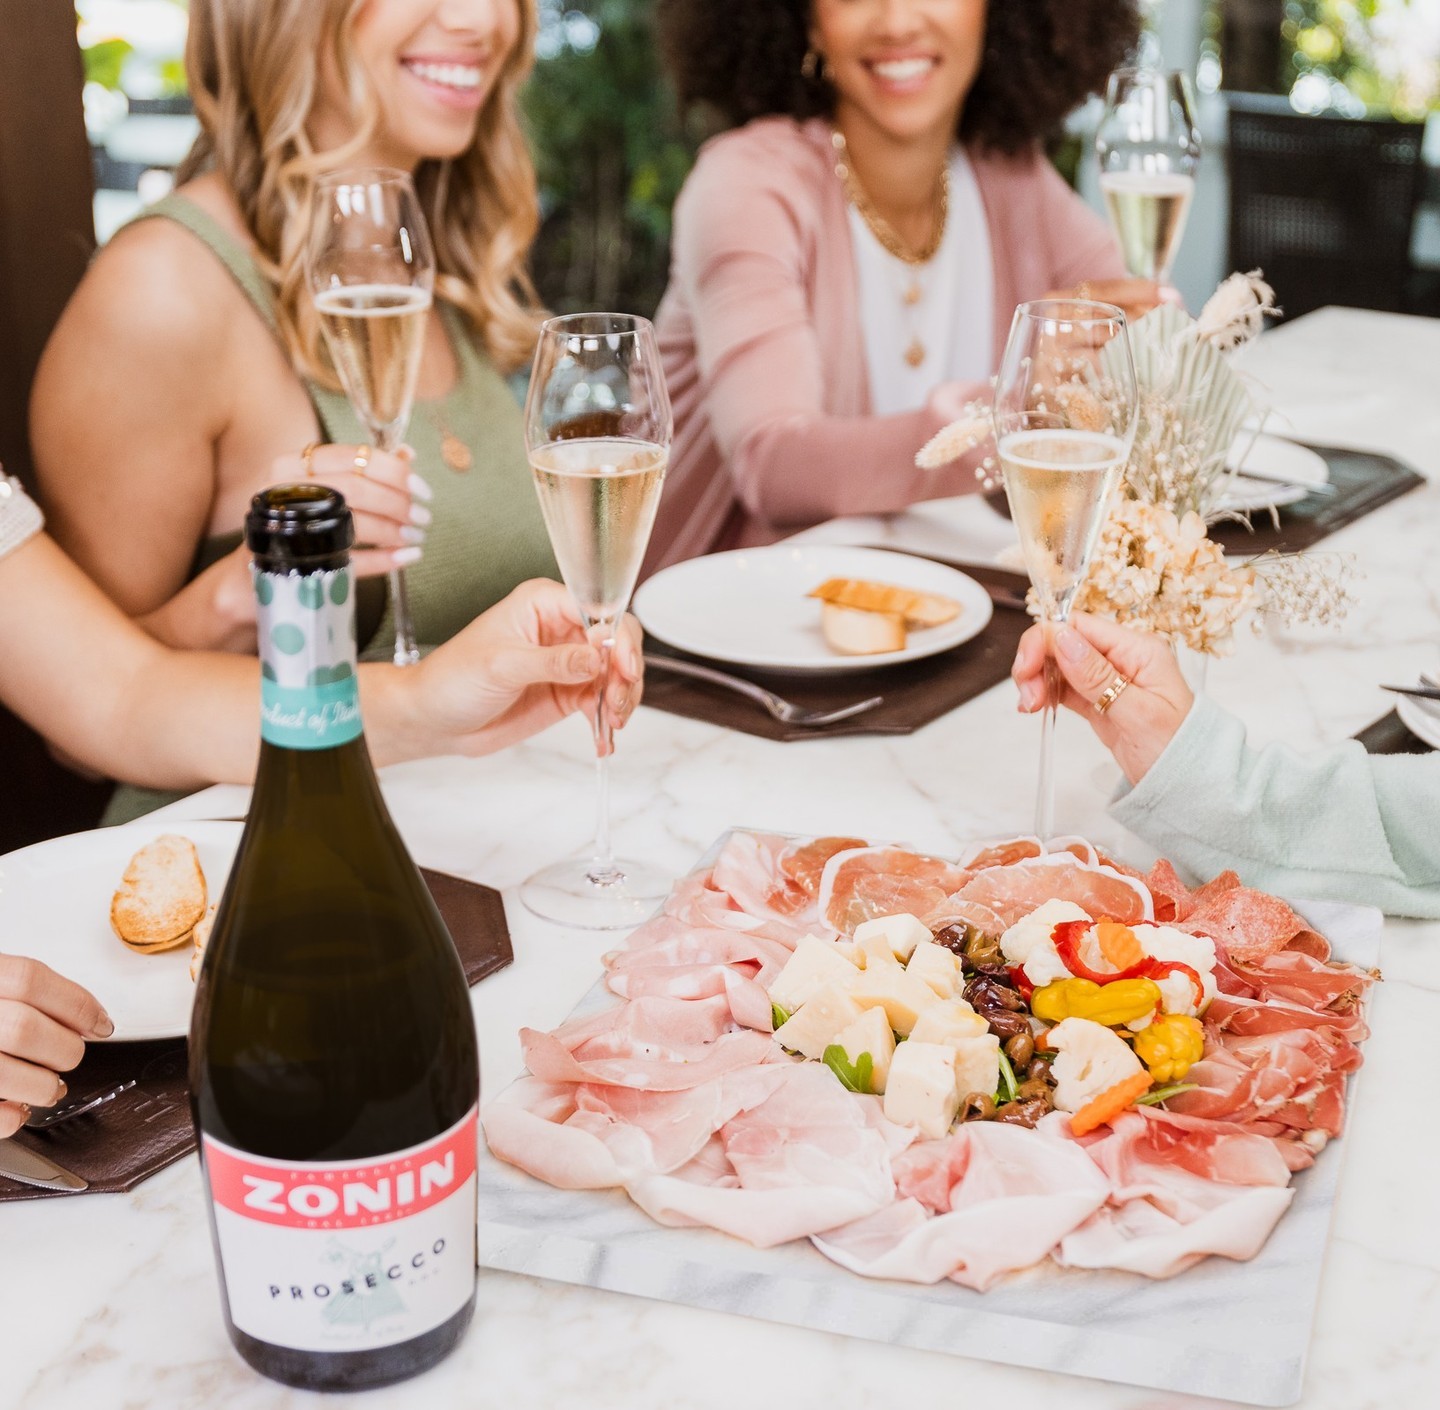 Things that make us smile: food, friends & Zonin Prosecco🌸 ⁣🥂
⁣
⁣
#zoninprosecco #prosecco #wine #lunch #girltime #cheers #bubbles #makeitpop